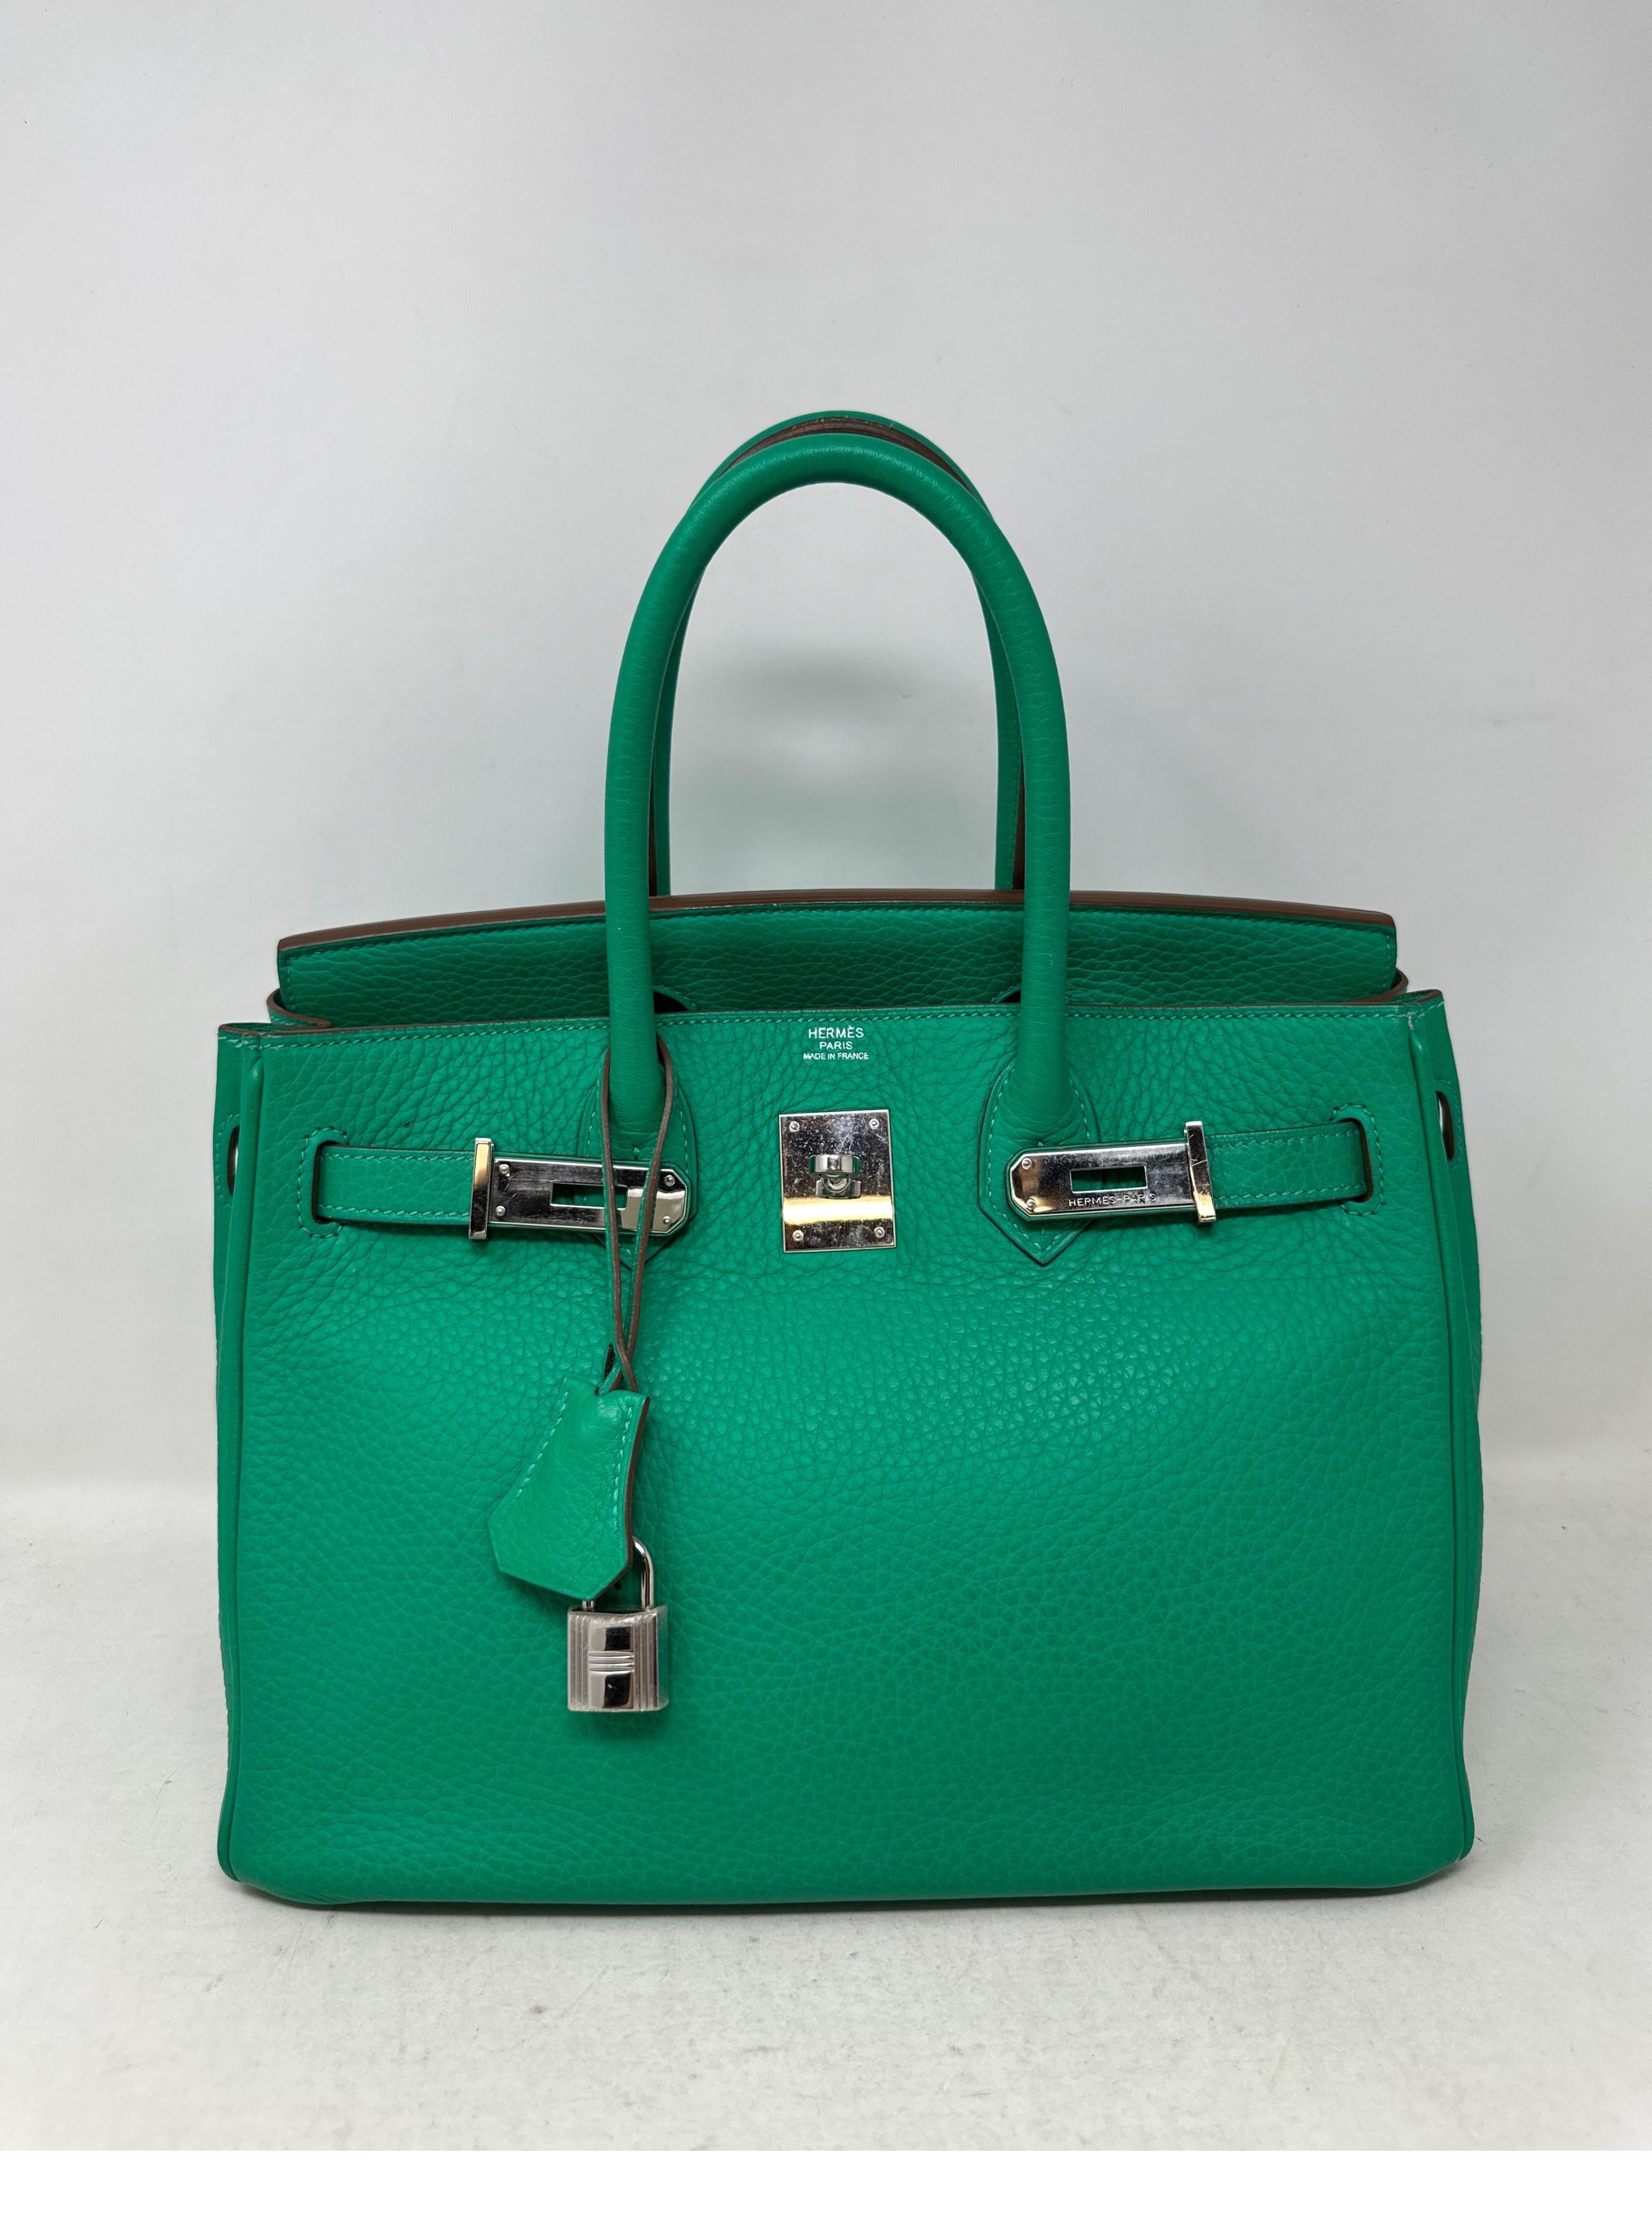 Hermes Menthe Birkin 30 Bag. Clemence leather. Palladium silver hardware. Minty green color. Very good condition. Light wear on the silver hardware. Interior clean. Includes clochette, lock, keys, and dust bag. Guaranteed authentic. 